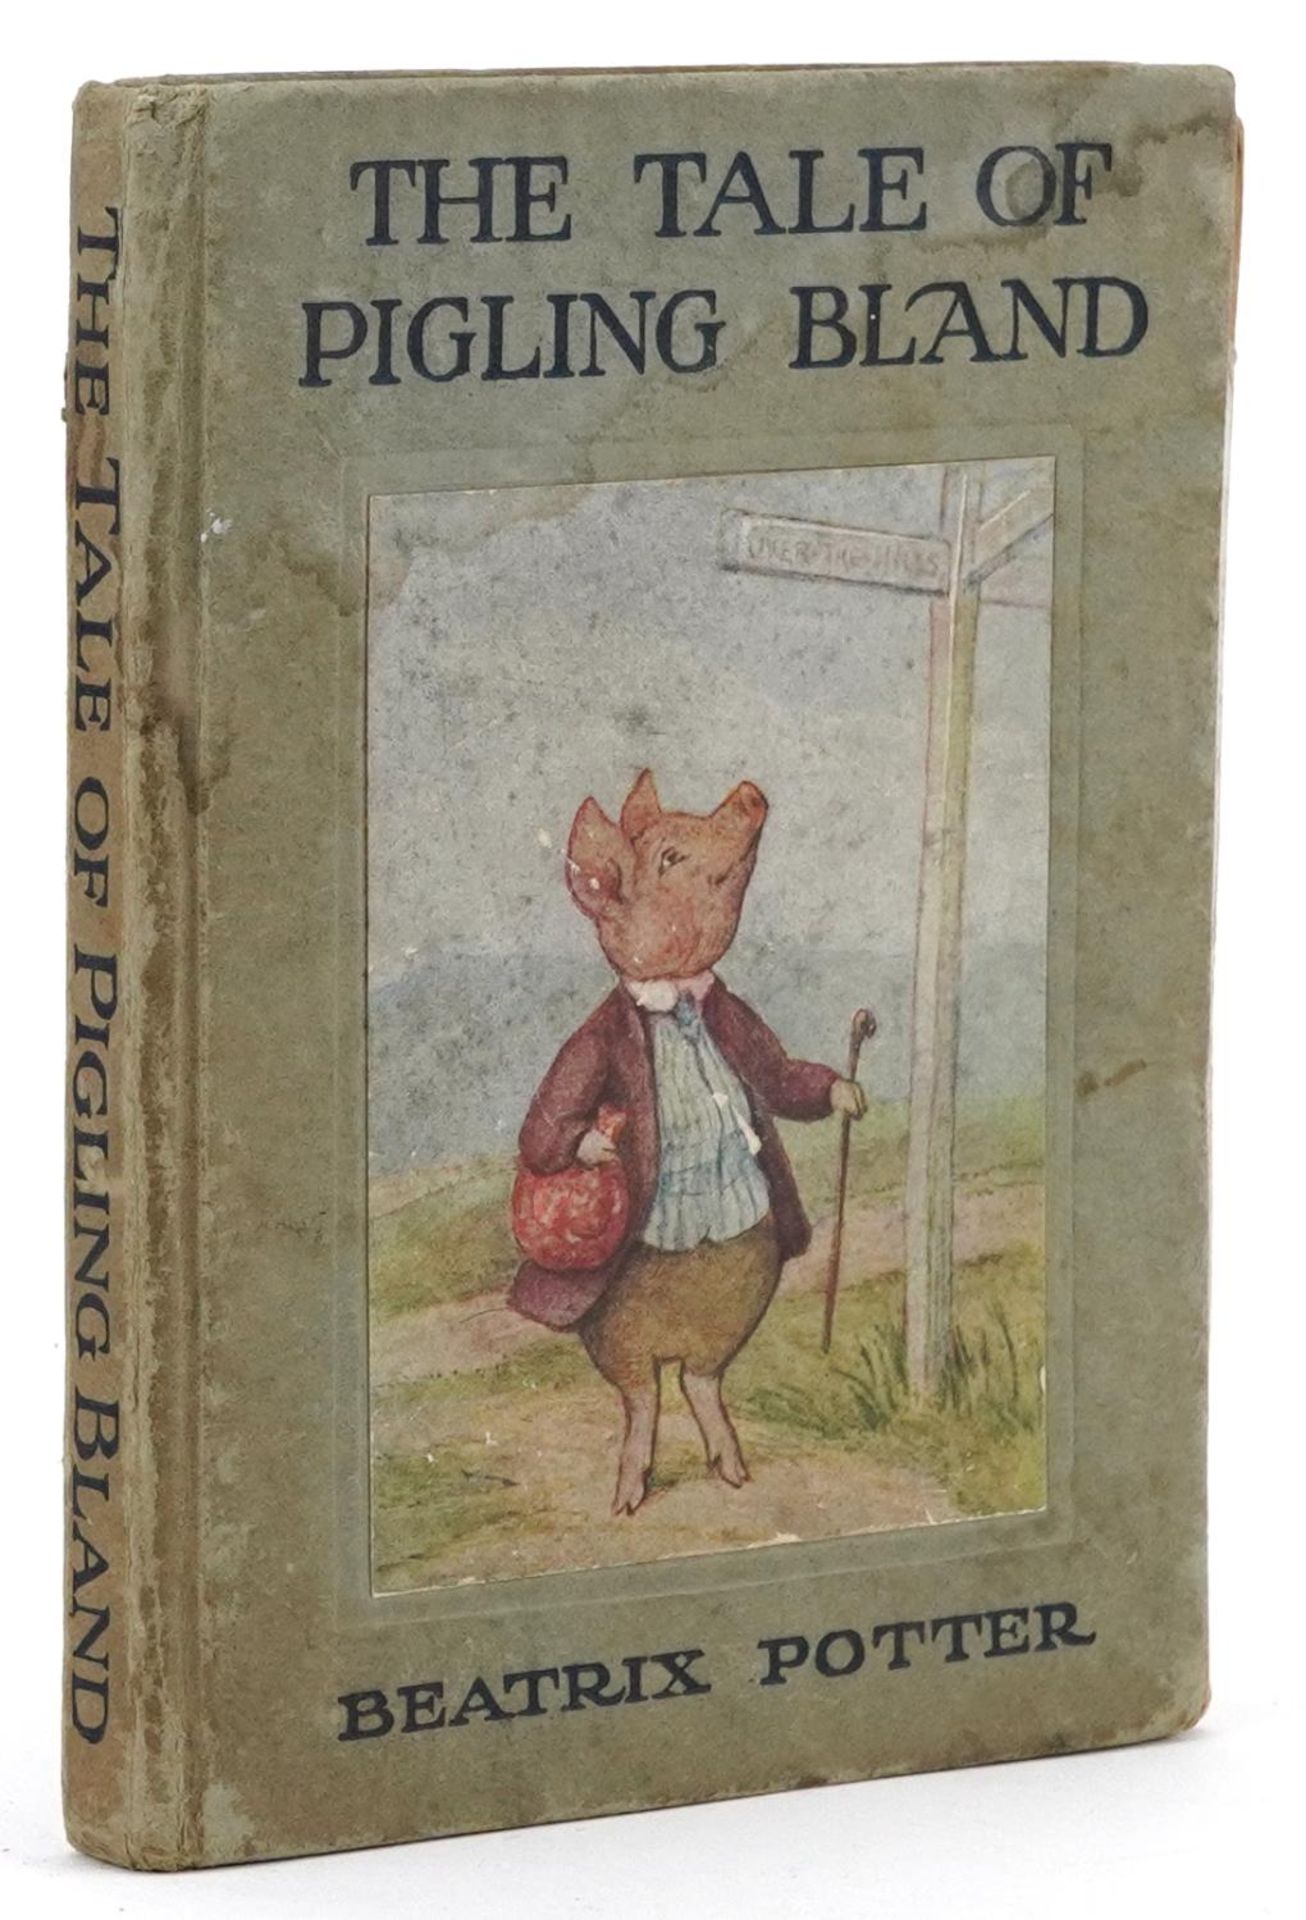 The Tale of Pigling Bland, hardback book by Beatrix Potter published London Frederick Warne & Co,